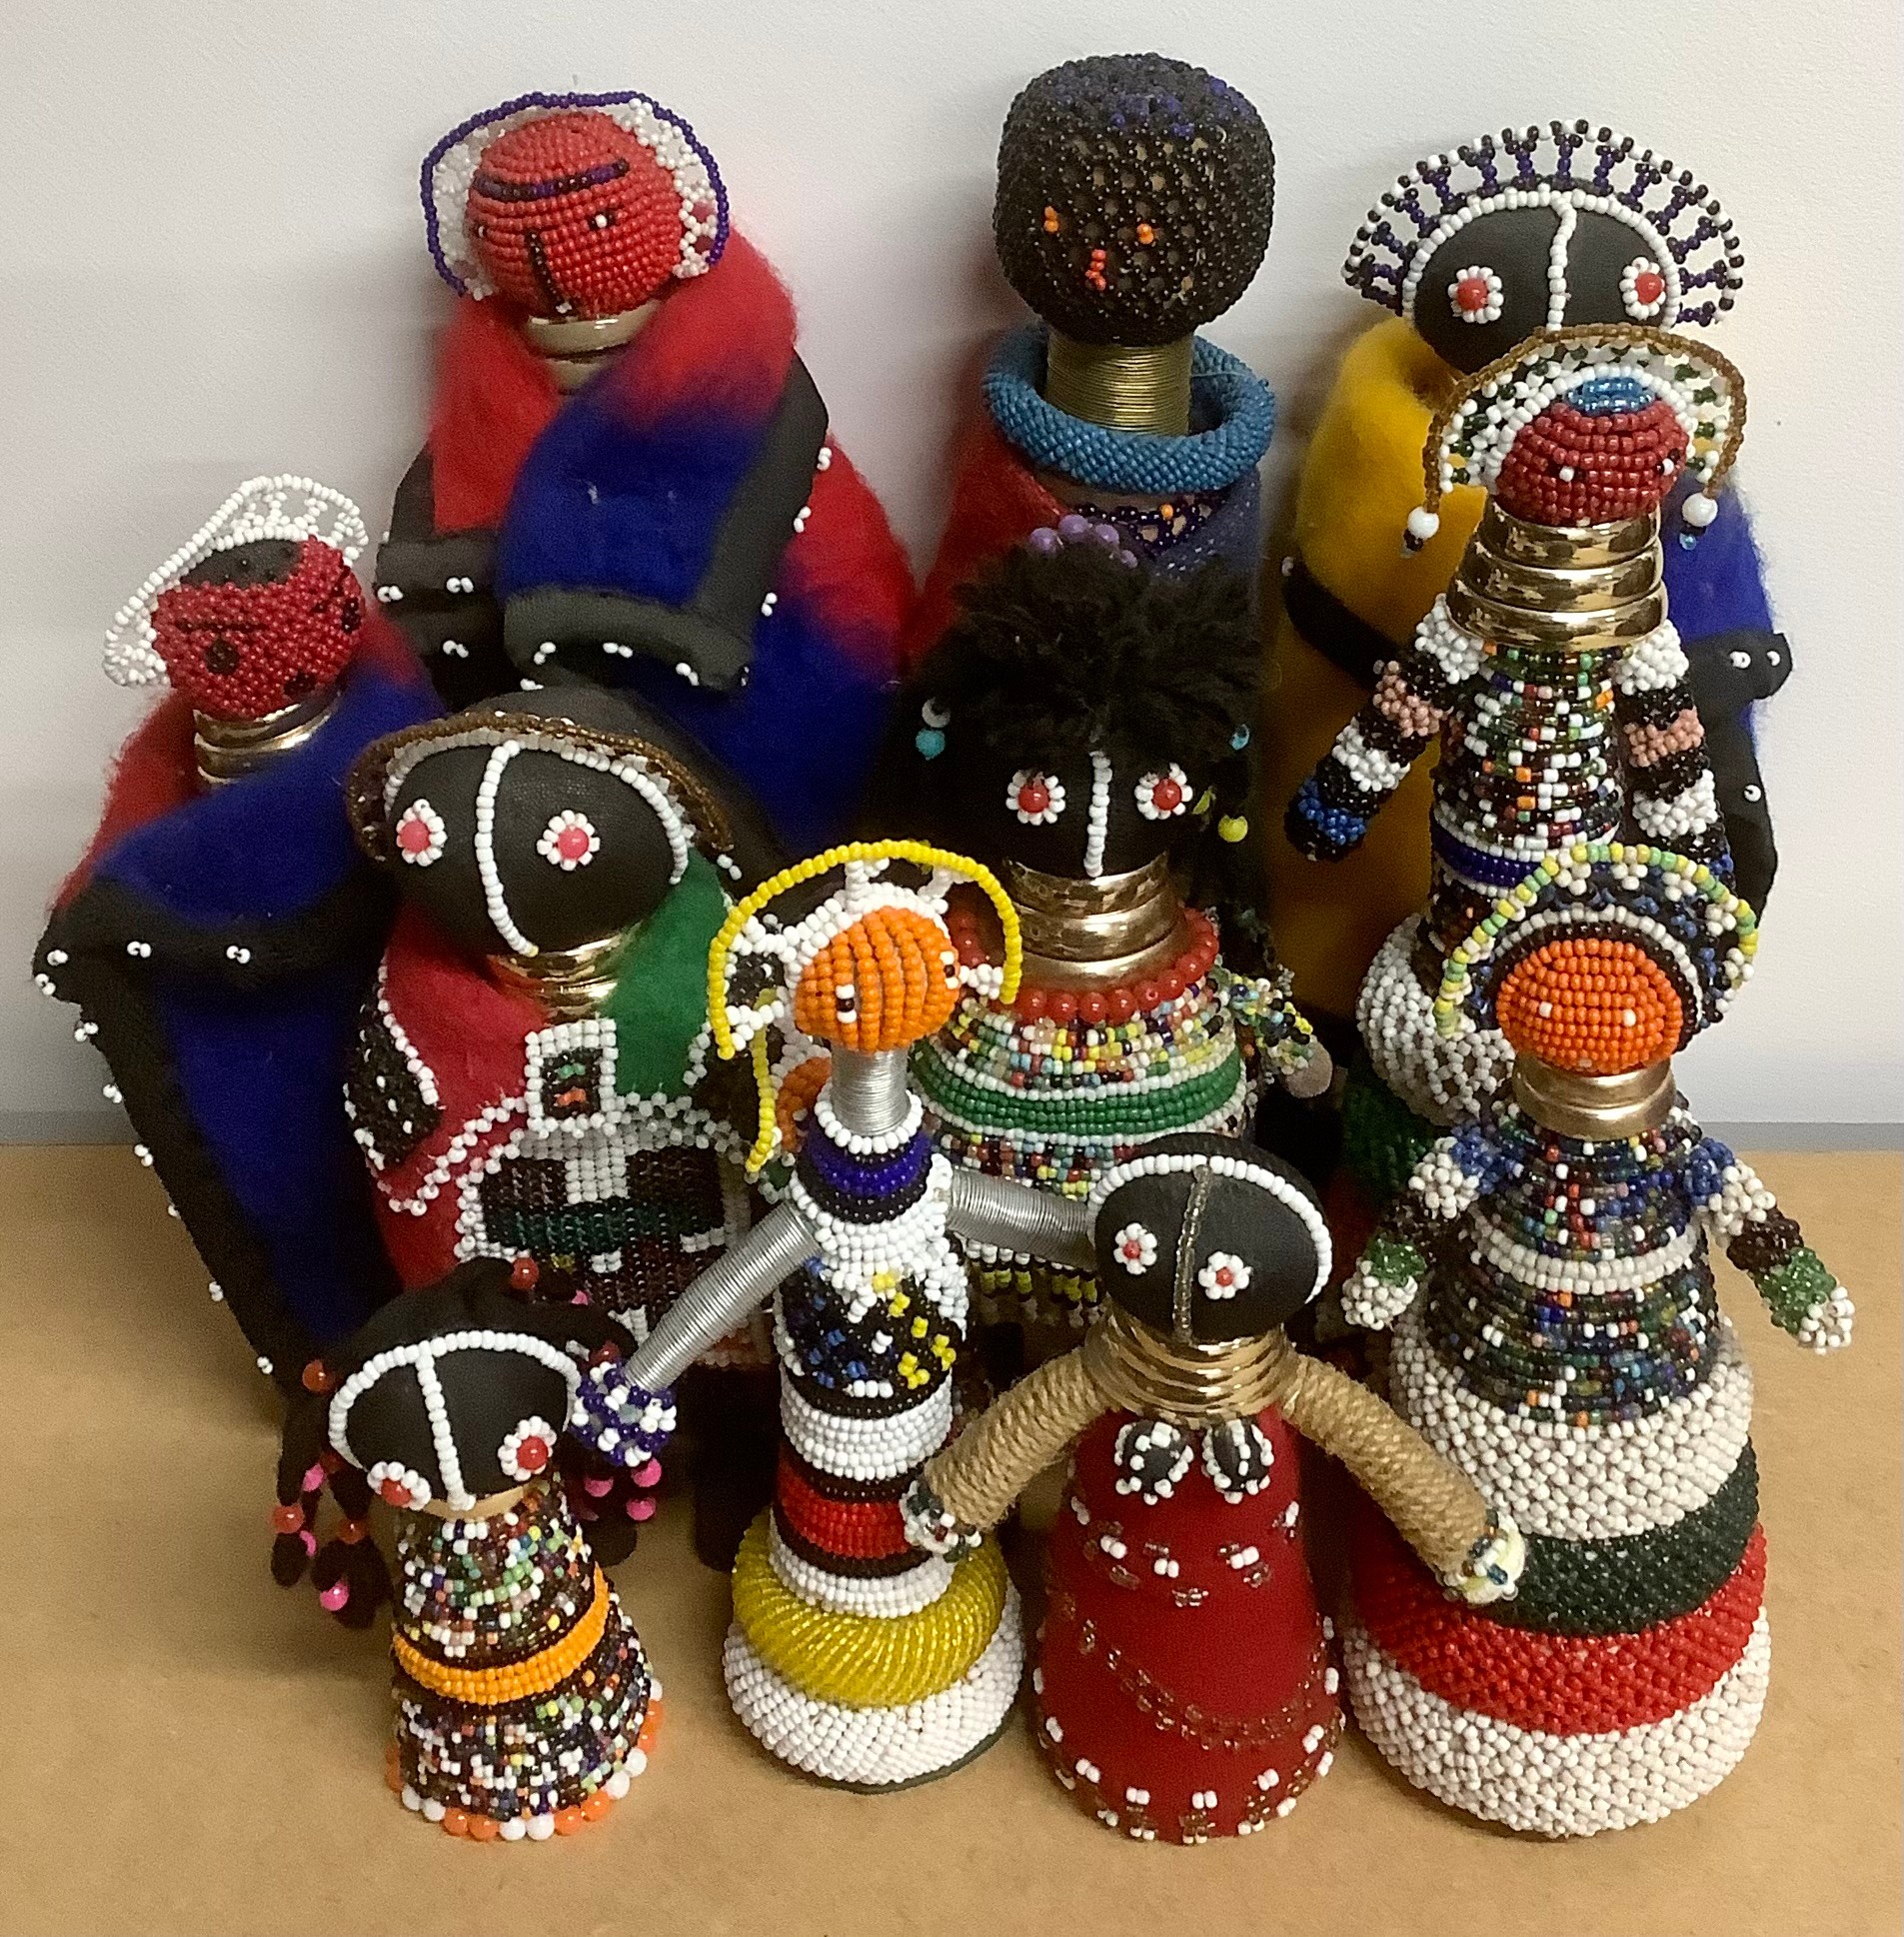 Tribal Art & the Eclectic Interior - a collection of Ndebele beadwork fertility and initiation - Image 2 of 2